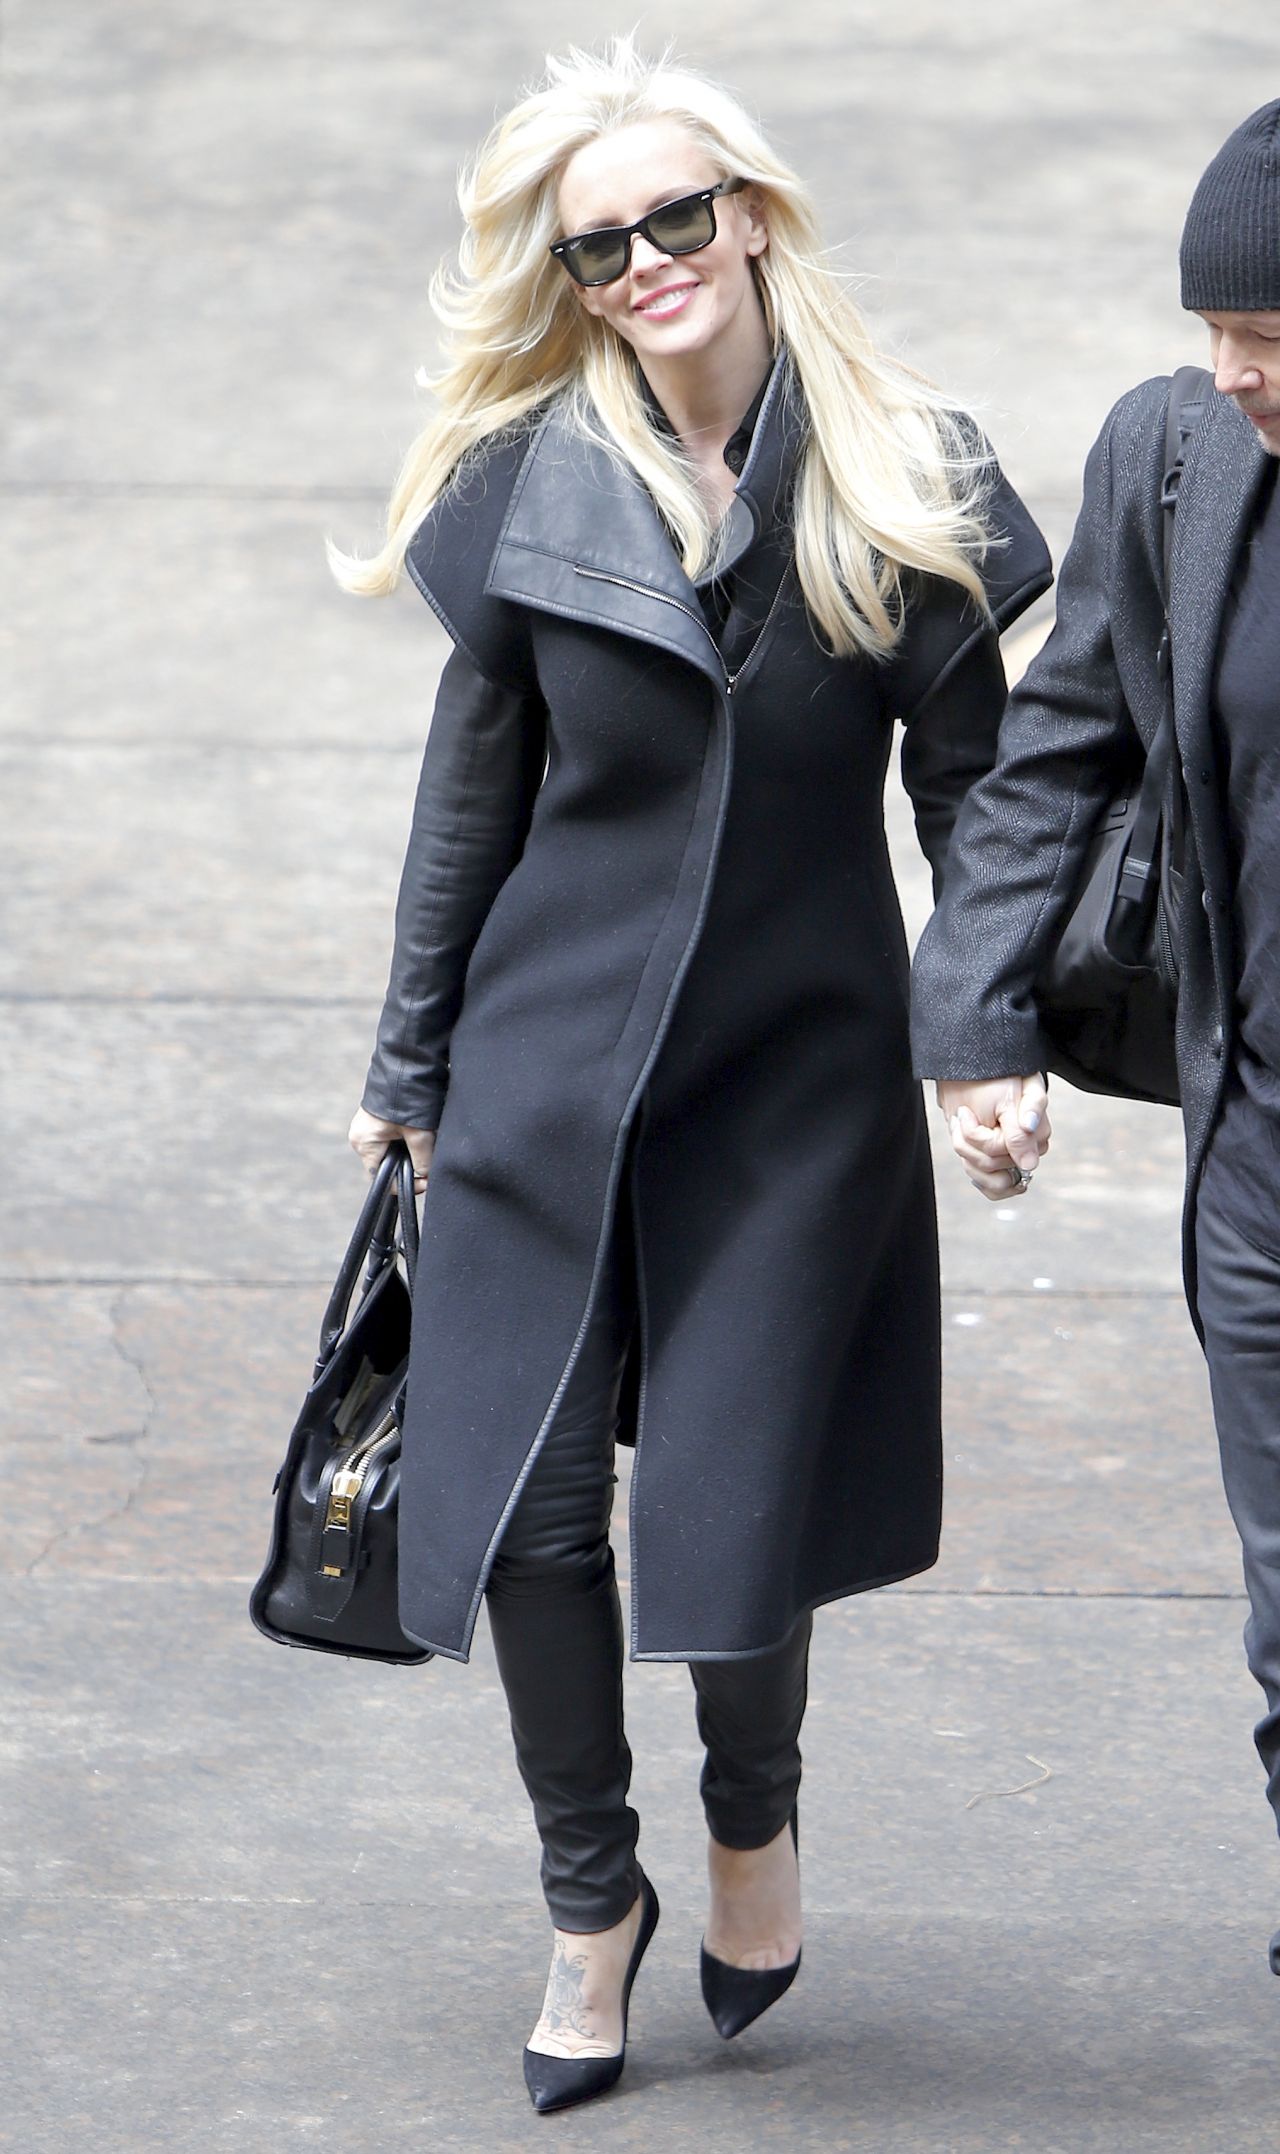 Jenny McCarthy Casual Style - Out in New York City, MArch 2015